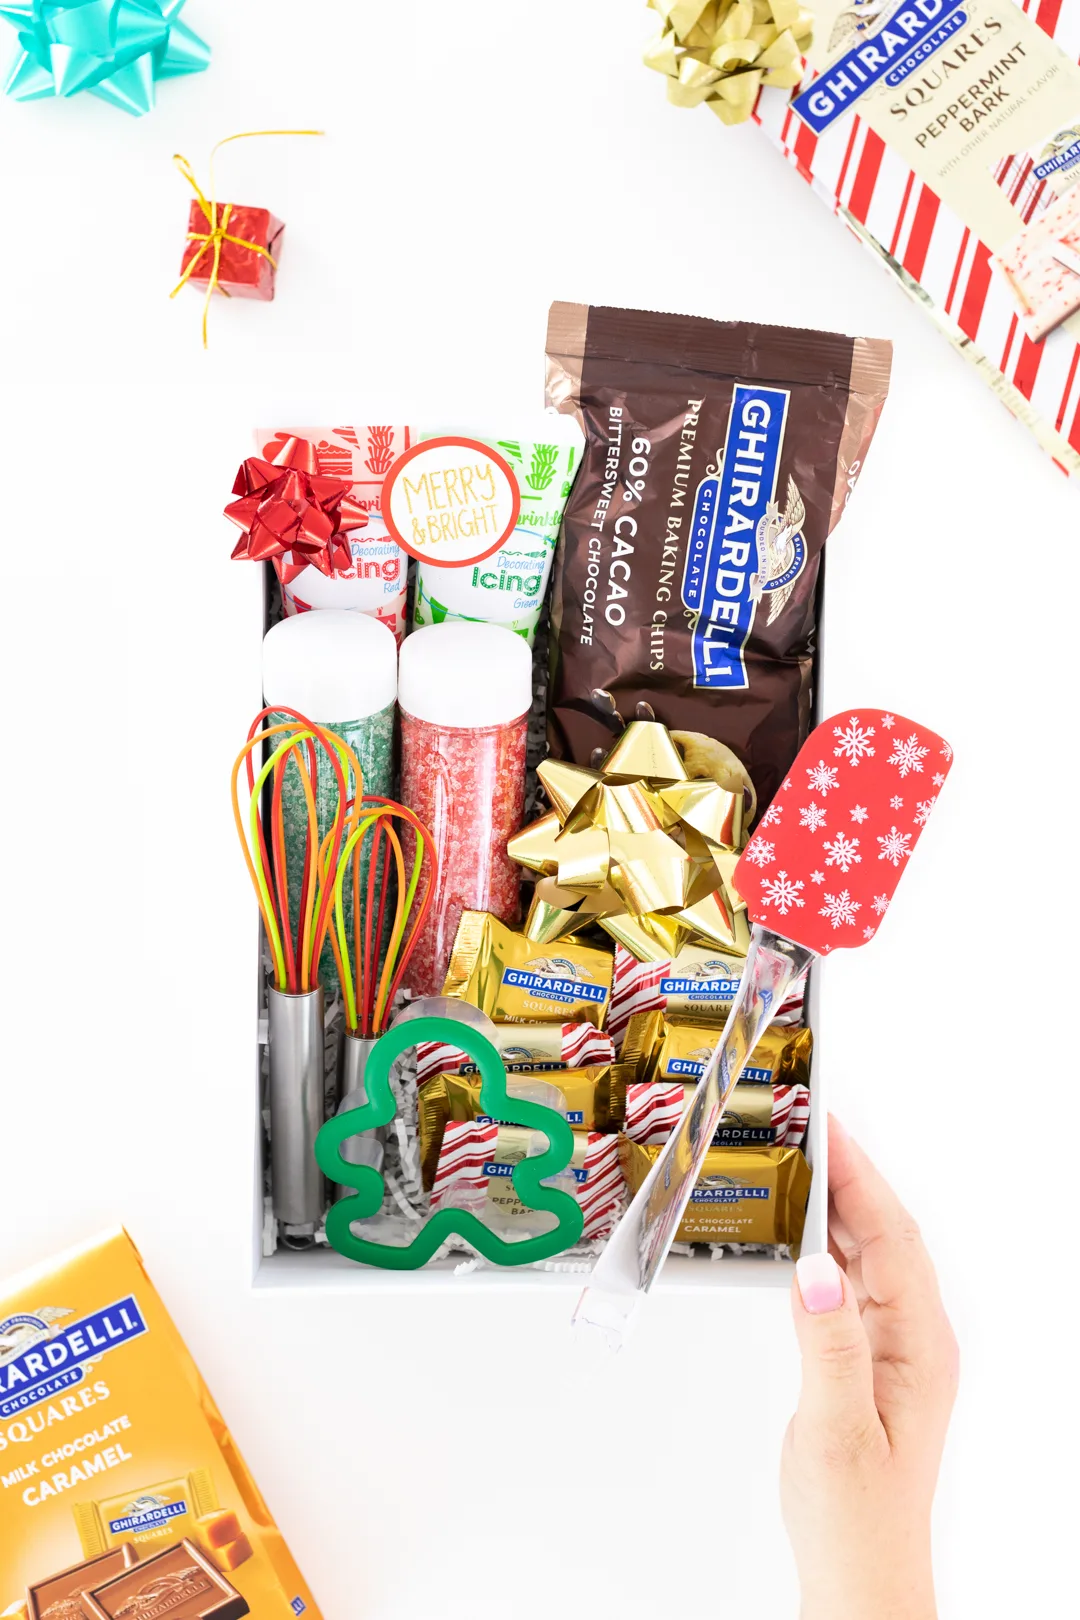 Chocolate Baking Gift Box with chocolate chips, sprinkles, icings, spatula and whisks.